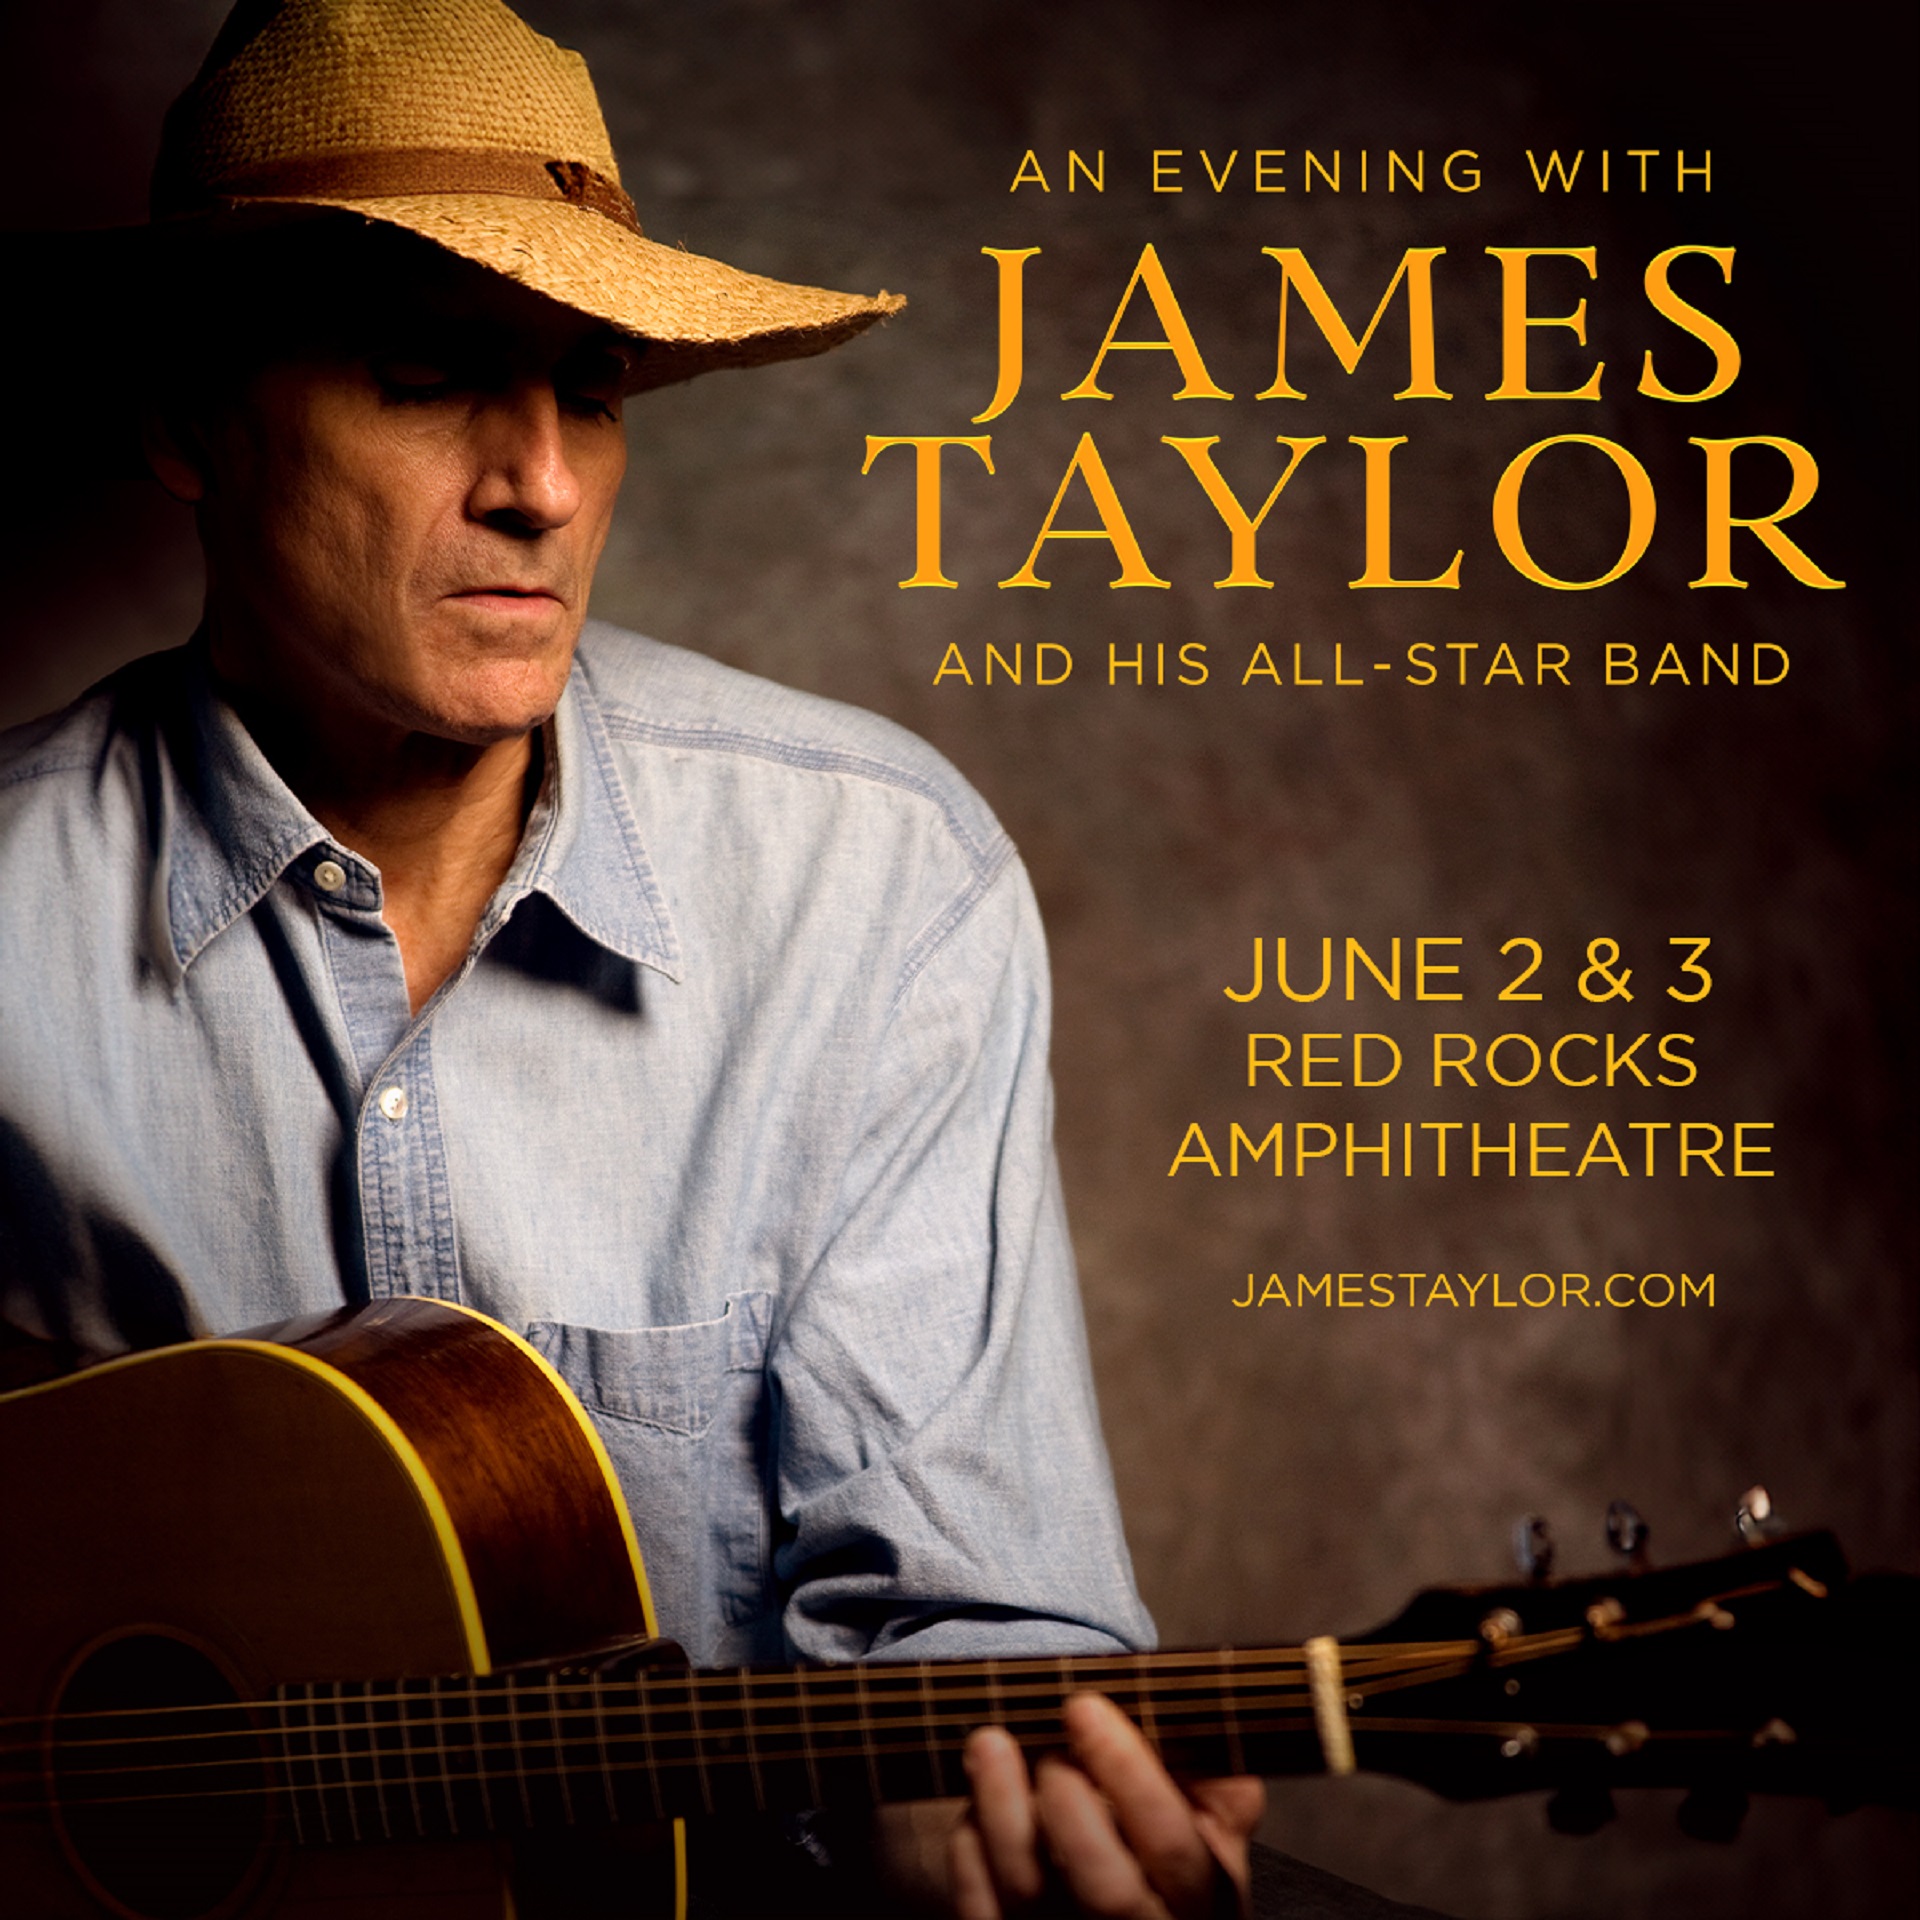 Legendary James Taylor and His All-Star Band to Grace Red Rocks Amphitheatre